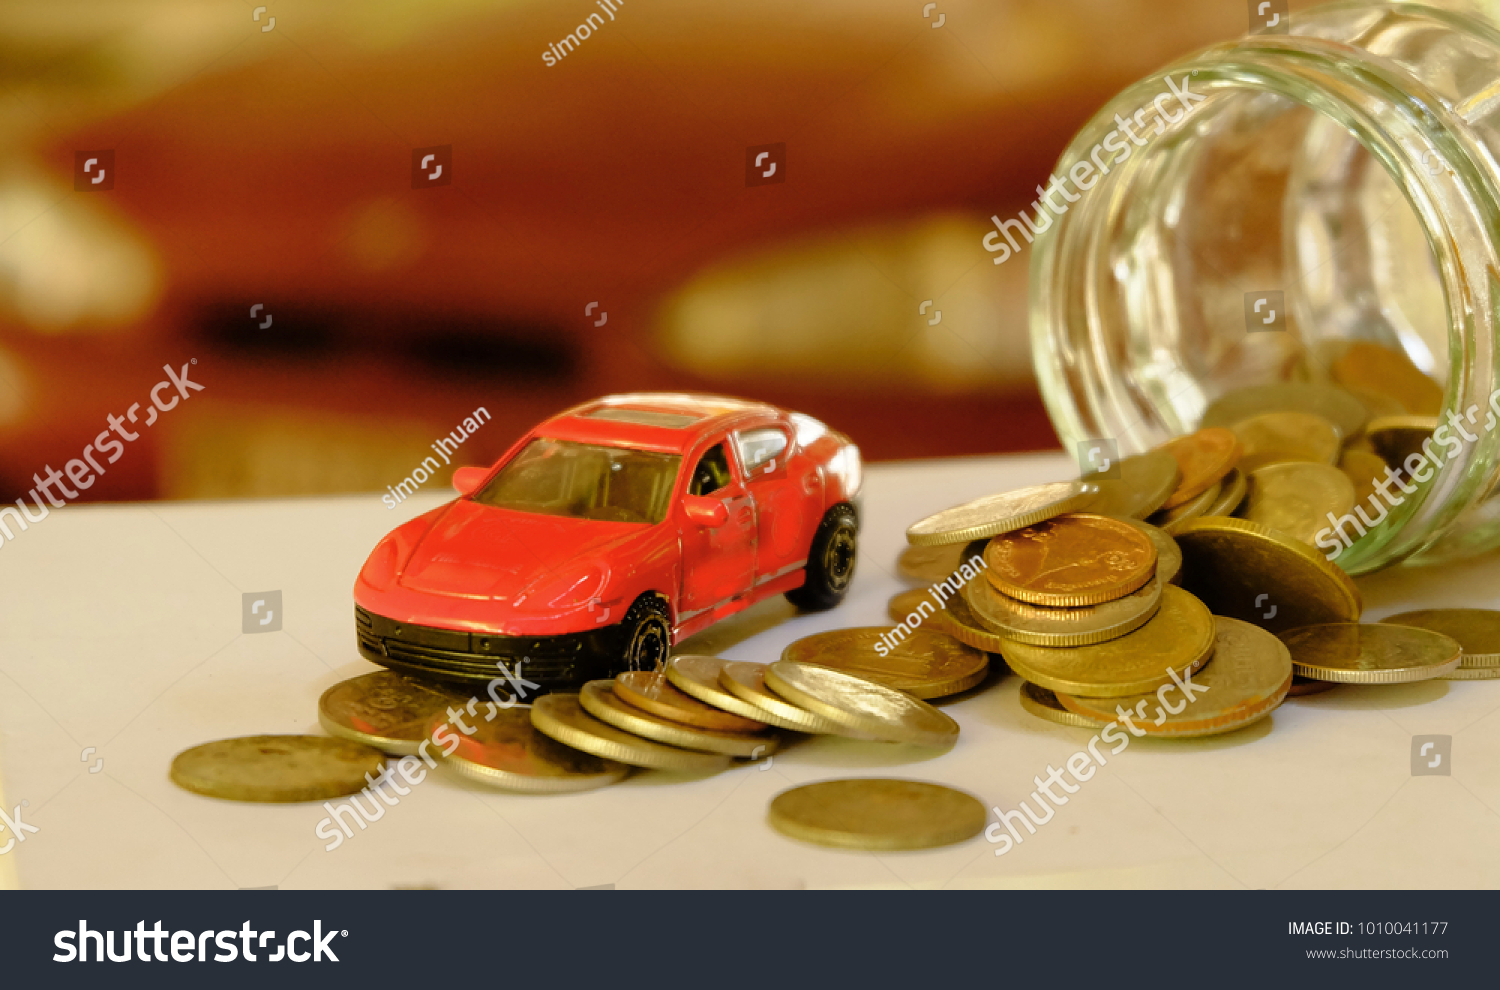 Car Insurance Finance Themes Stock Photo Edit Now 1010041177 for sizing 1500 X 990